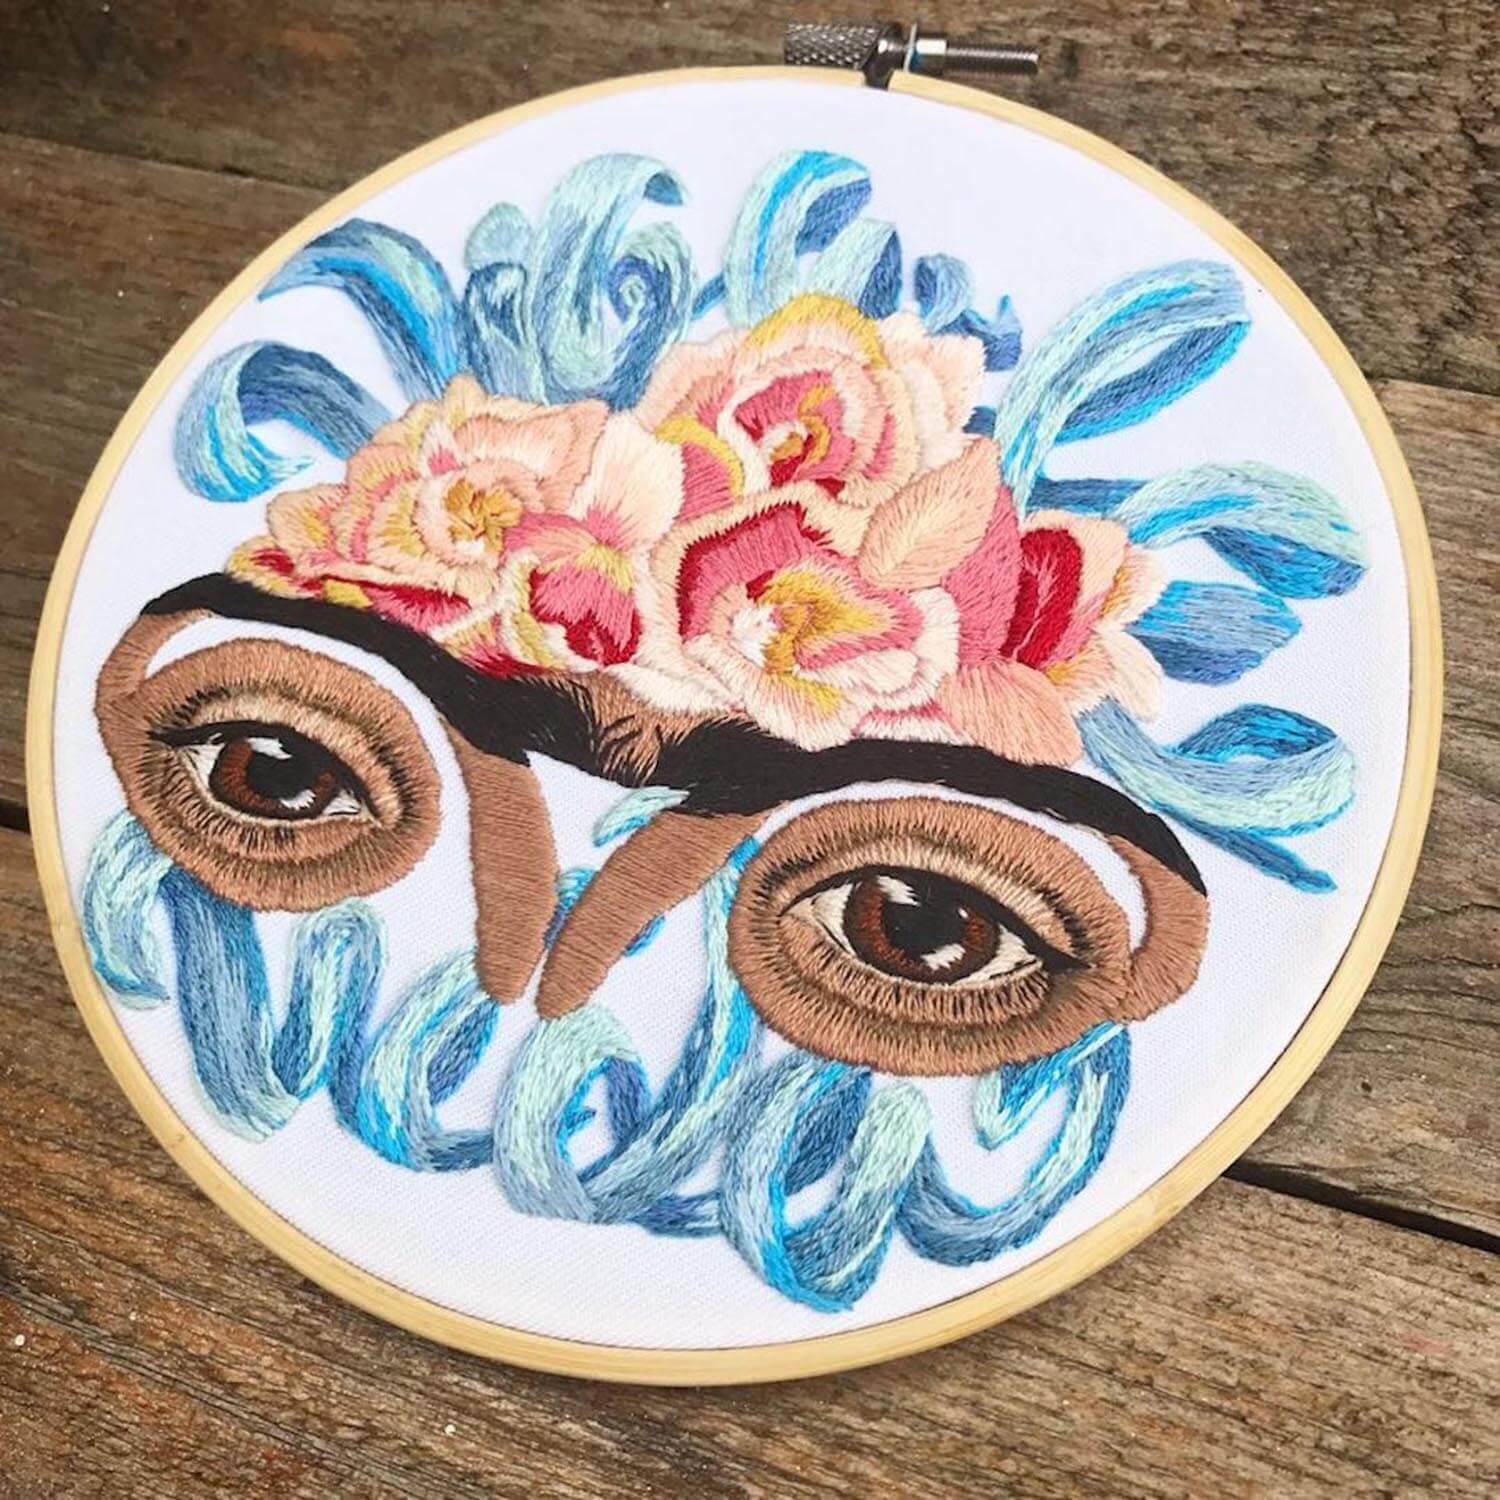 Ovaries embroidery with frida kahlo motif